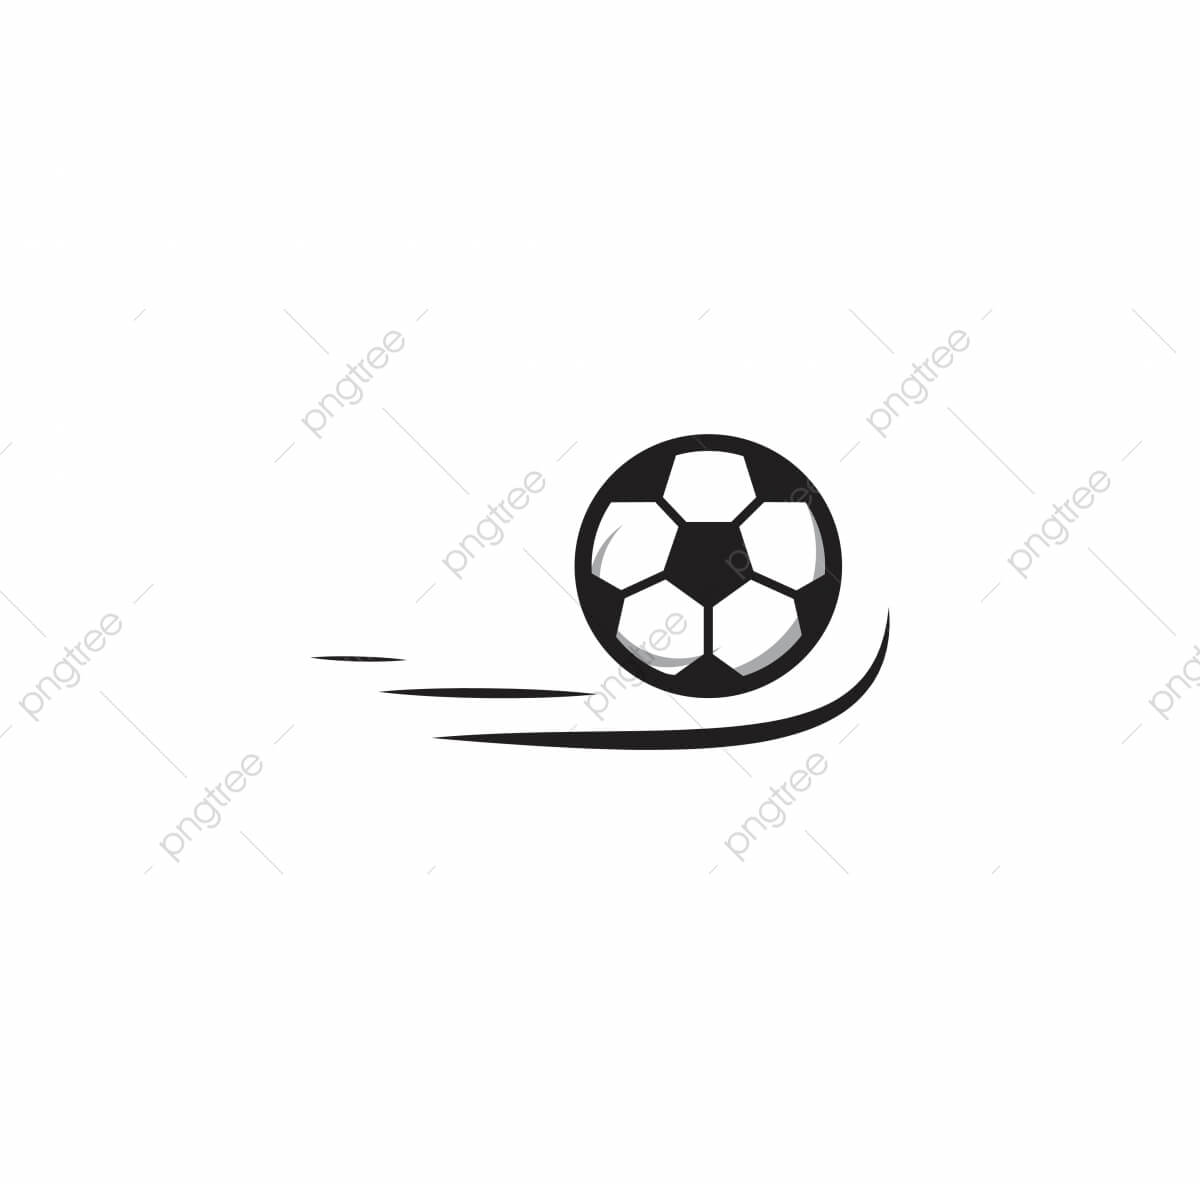 Soccer Ball Vector Template Design Illustration, Soccer Within Soccer Thank You Card Template